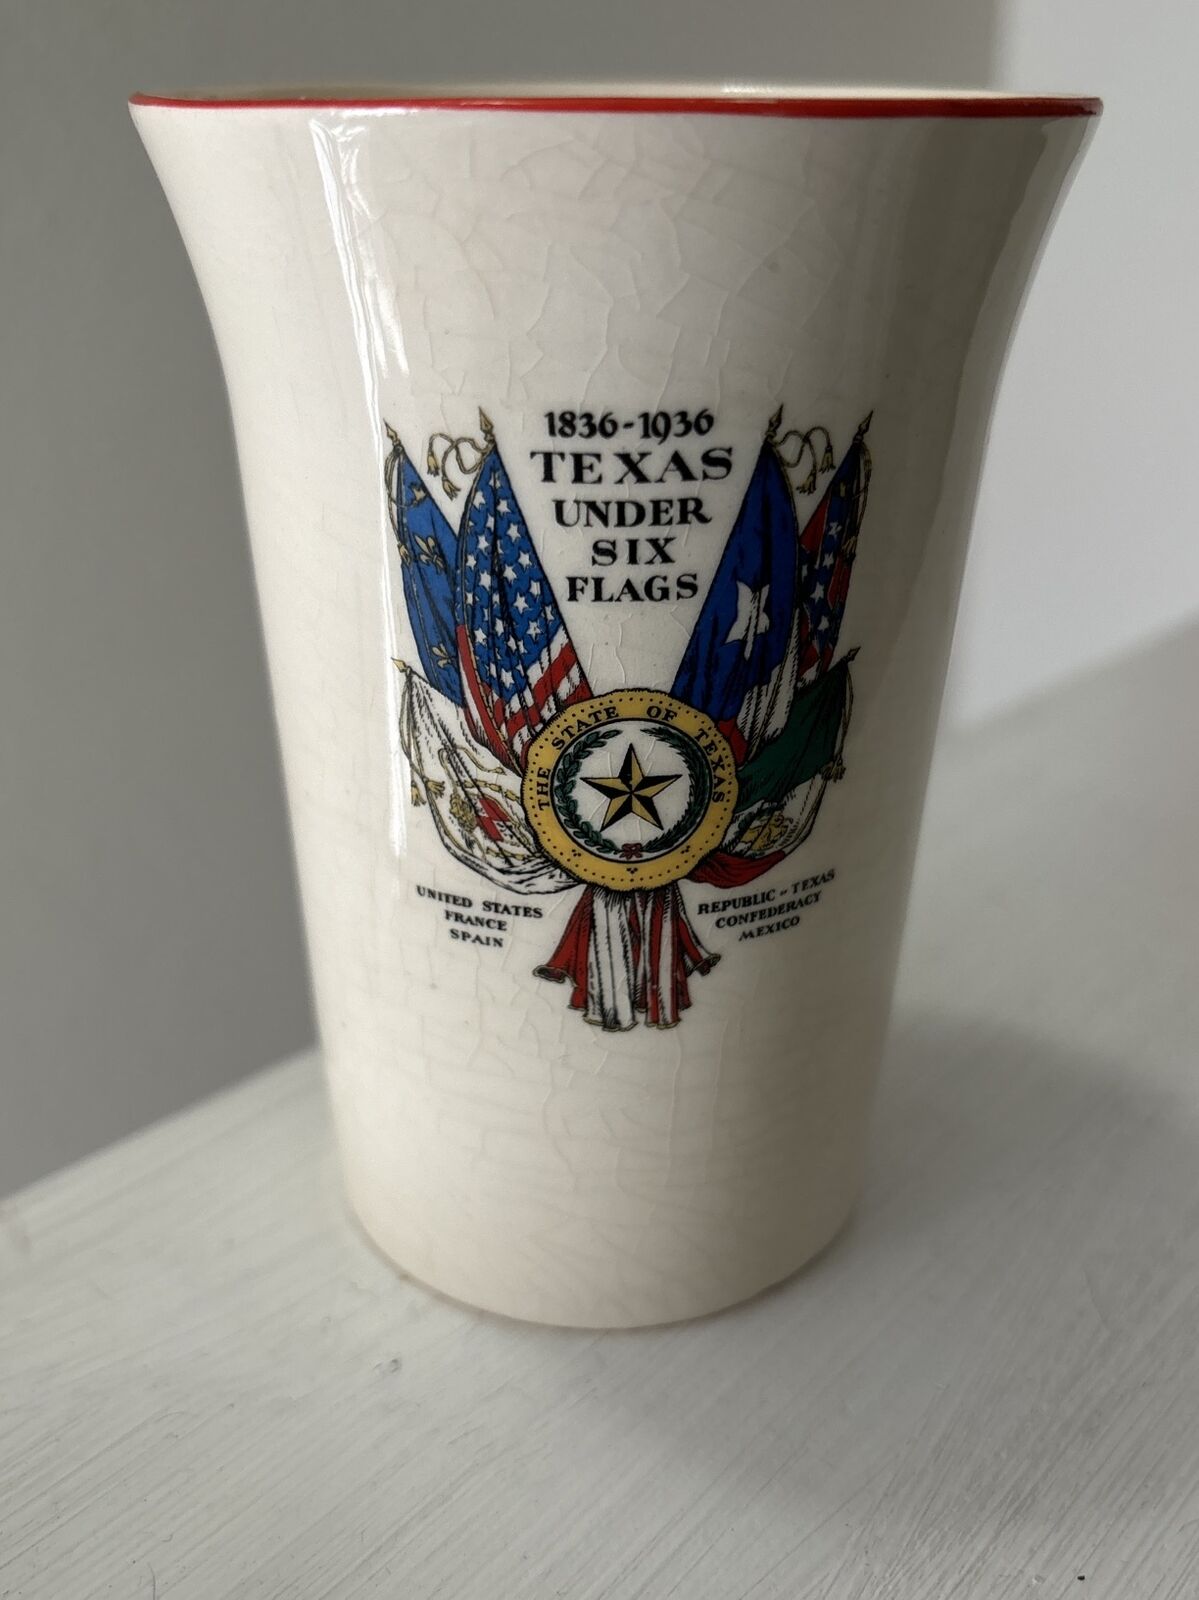 Rare 1836-1936 Texas Under Six Flags Cup